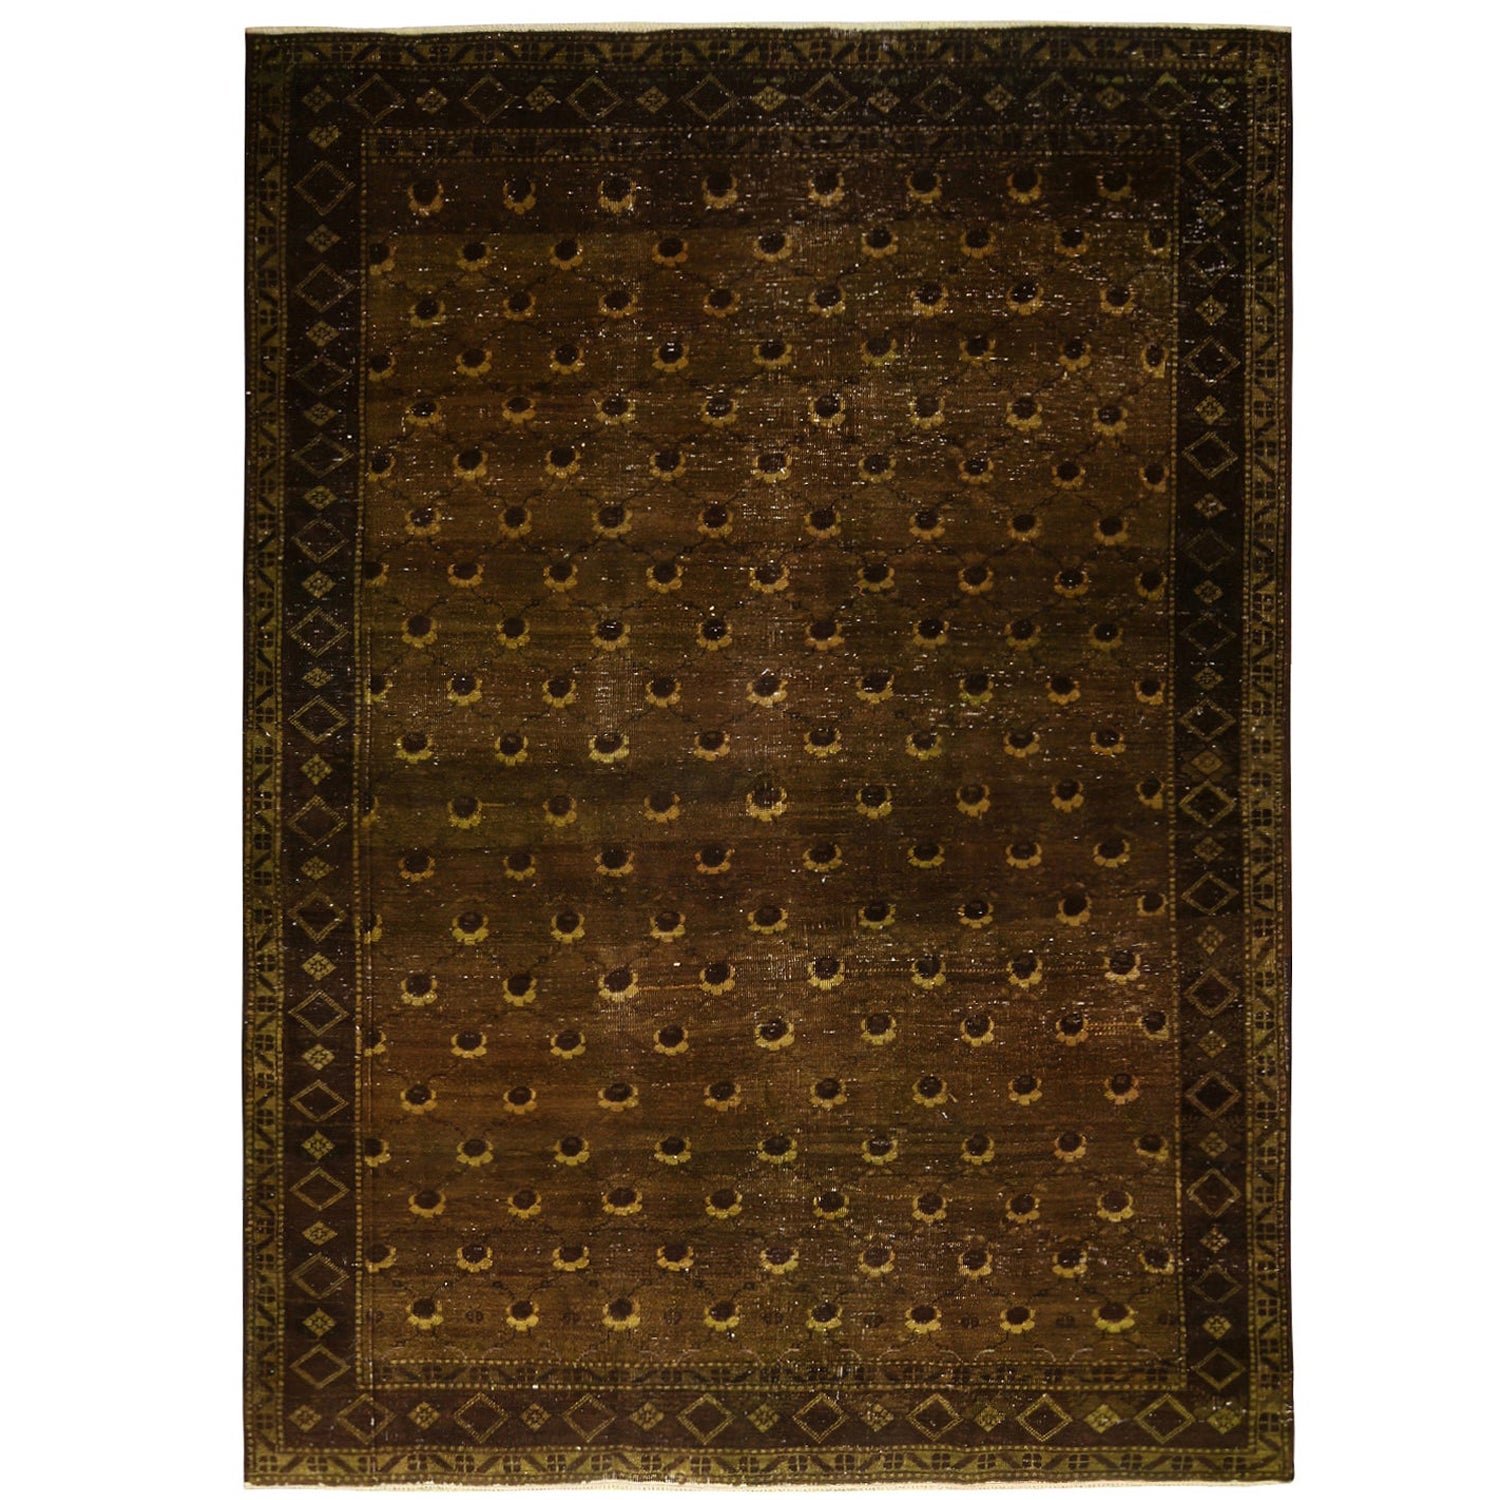 Vintage Mid-Century Golden-Brown and Green Wool Rug with Yellow Floral Accents